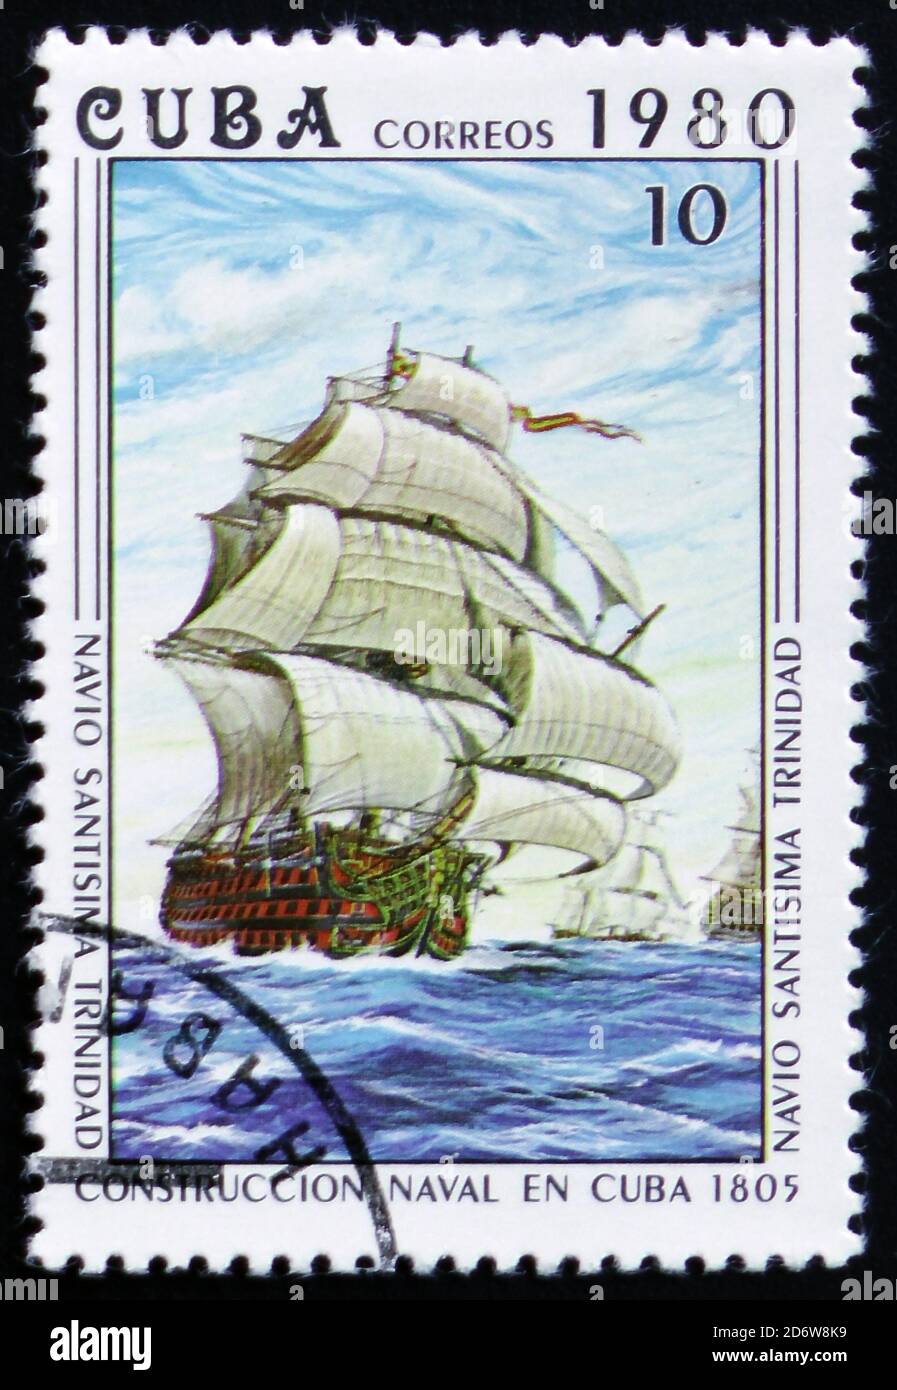 MOSCOW, RUSSIA - FEBRUARY 12, 2017: A stamp printed in the Cuba shows Santisima Trinidad, 1805, Ship under Construction, Construction of Naval Vessels Stock Photo